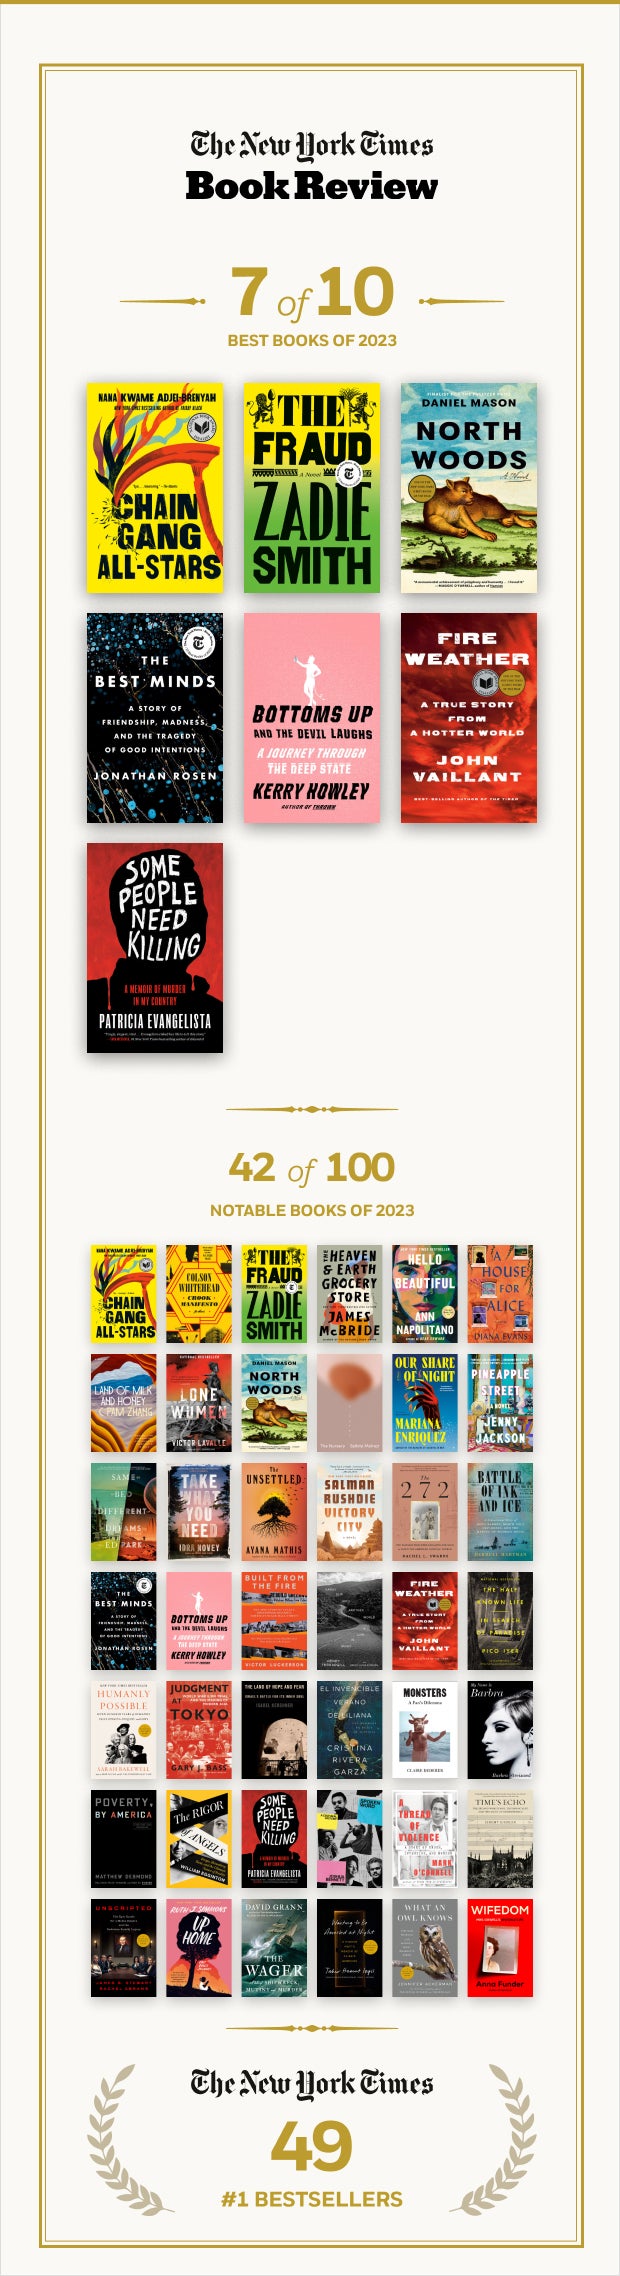 New York Times 7 out of 10 Best Books of 2023, 42 out of 100 Notable Books of 2023, 49 #1 Bestsellers